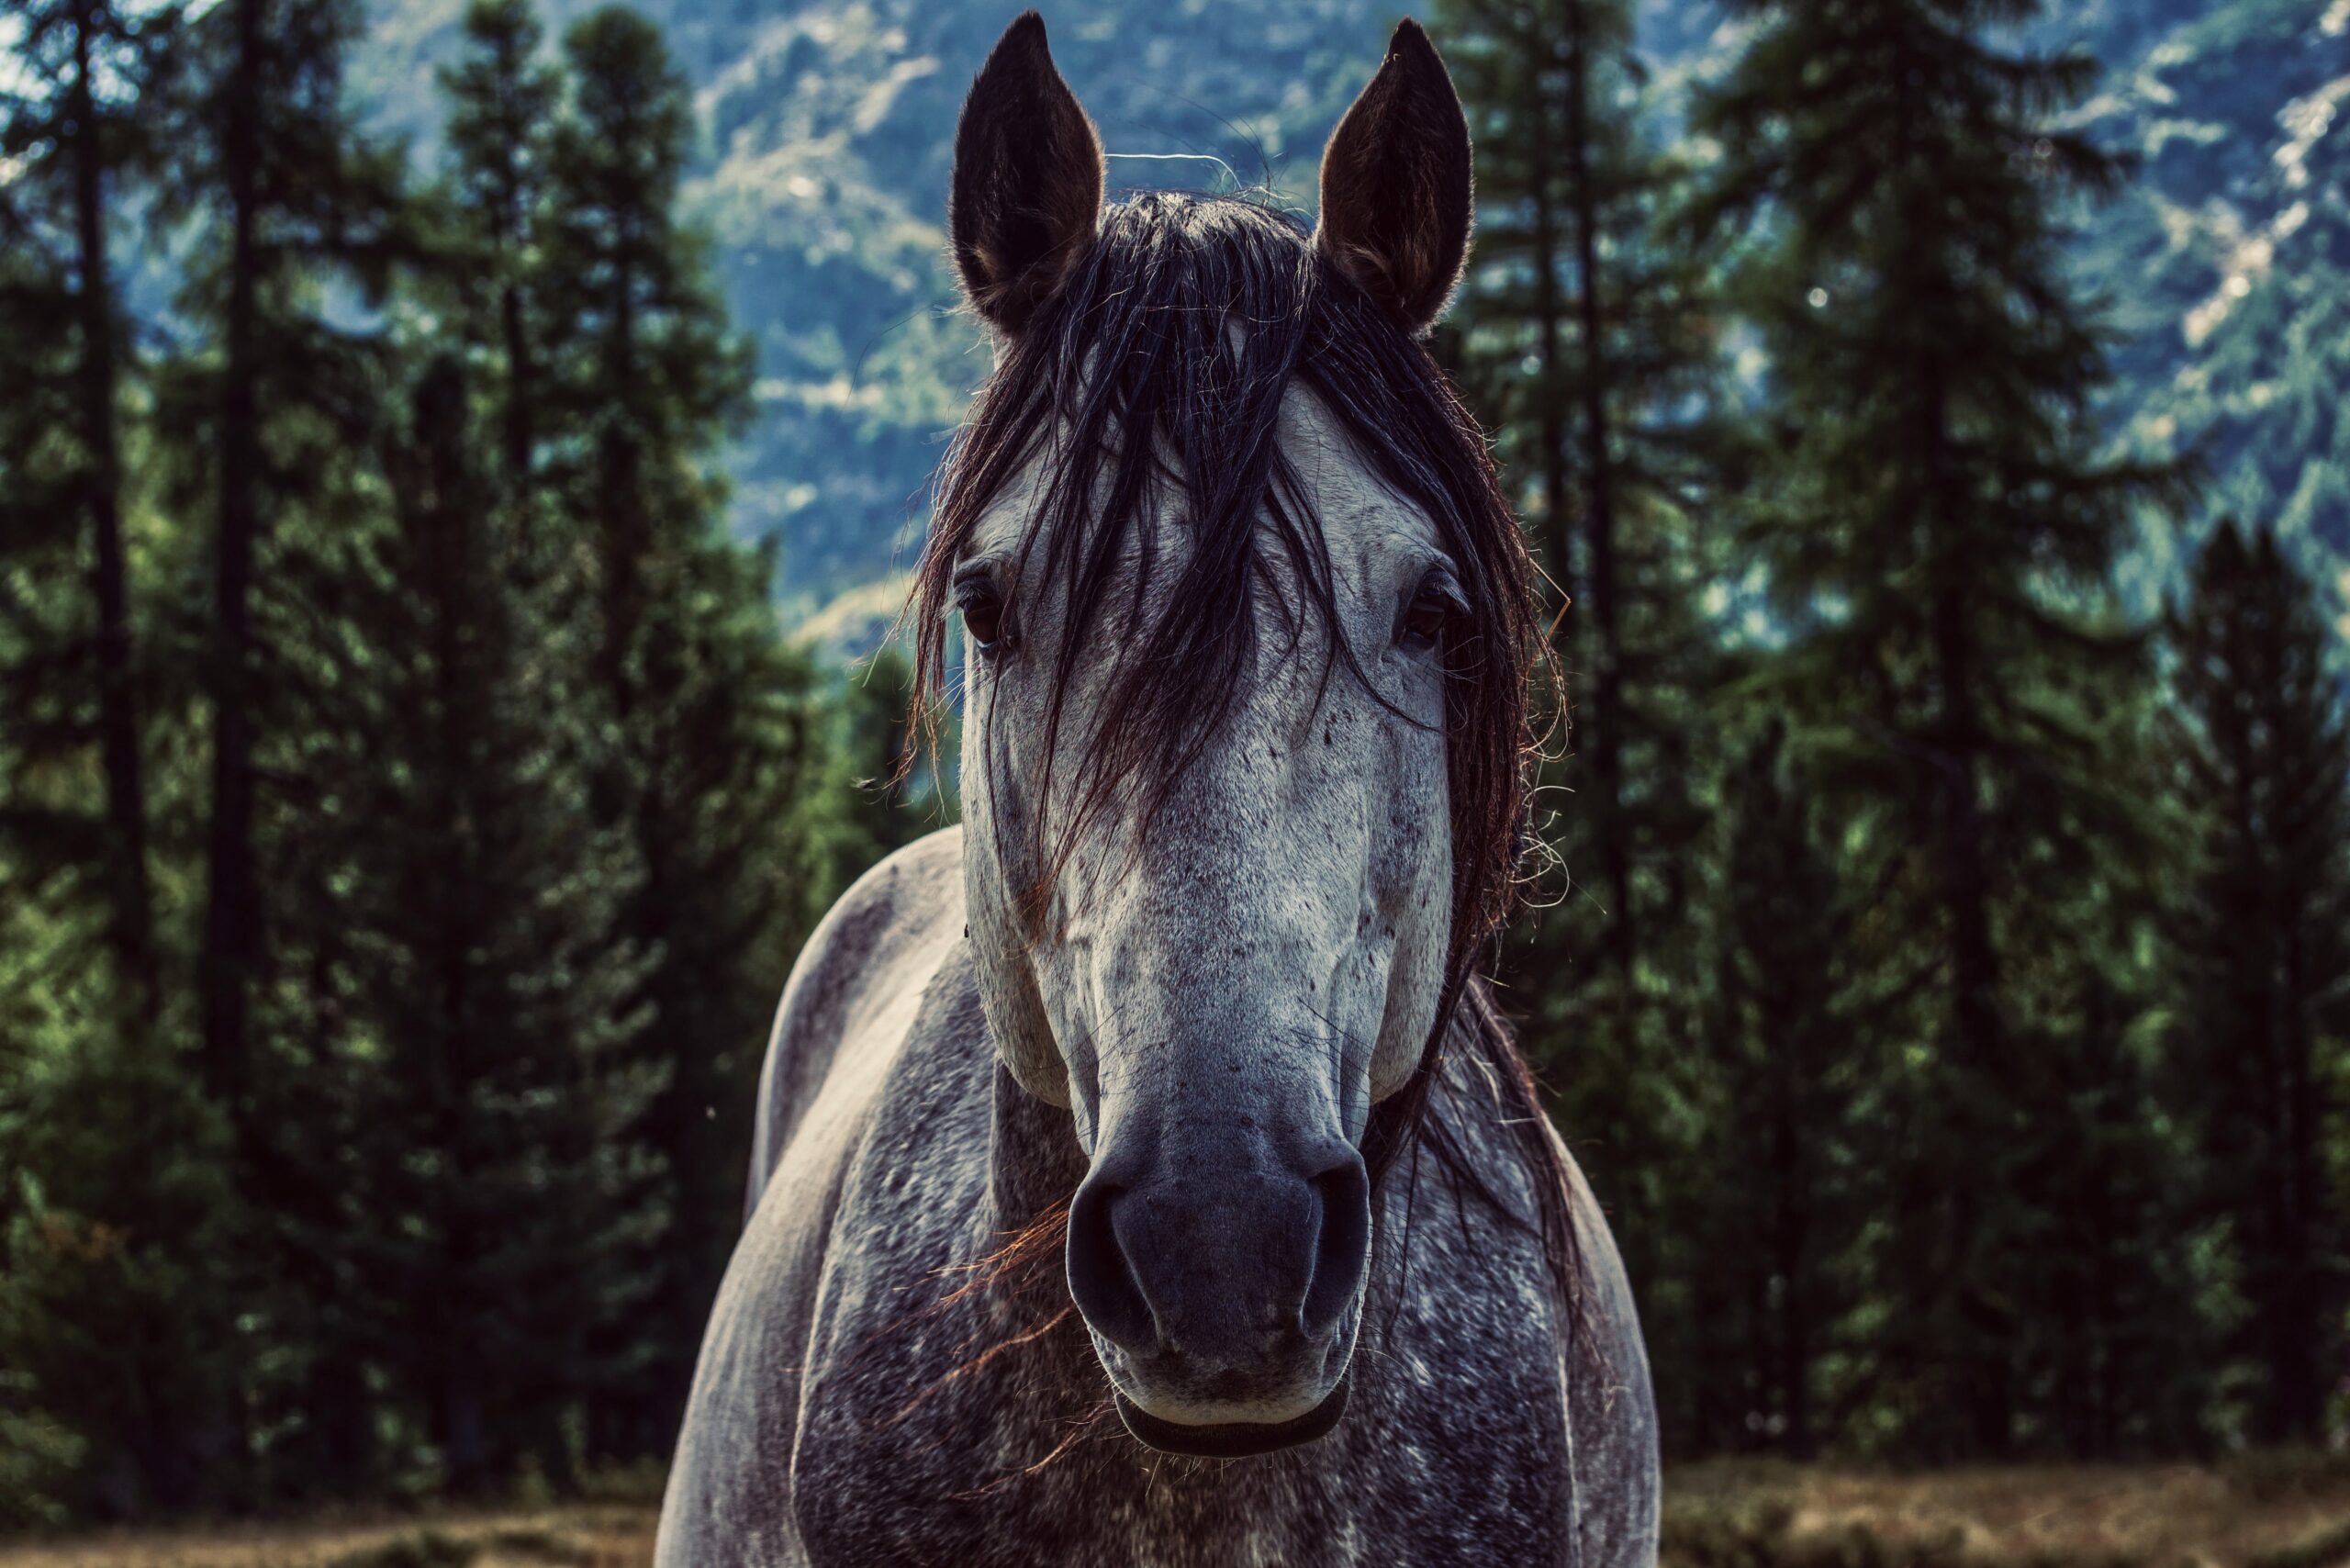 How do horses survive in the wild?